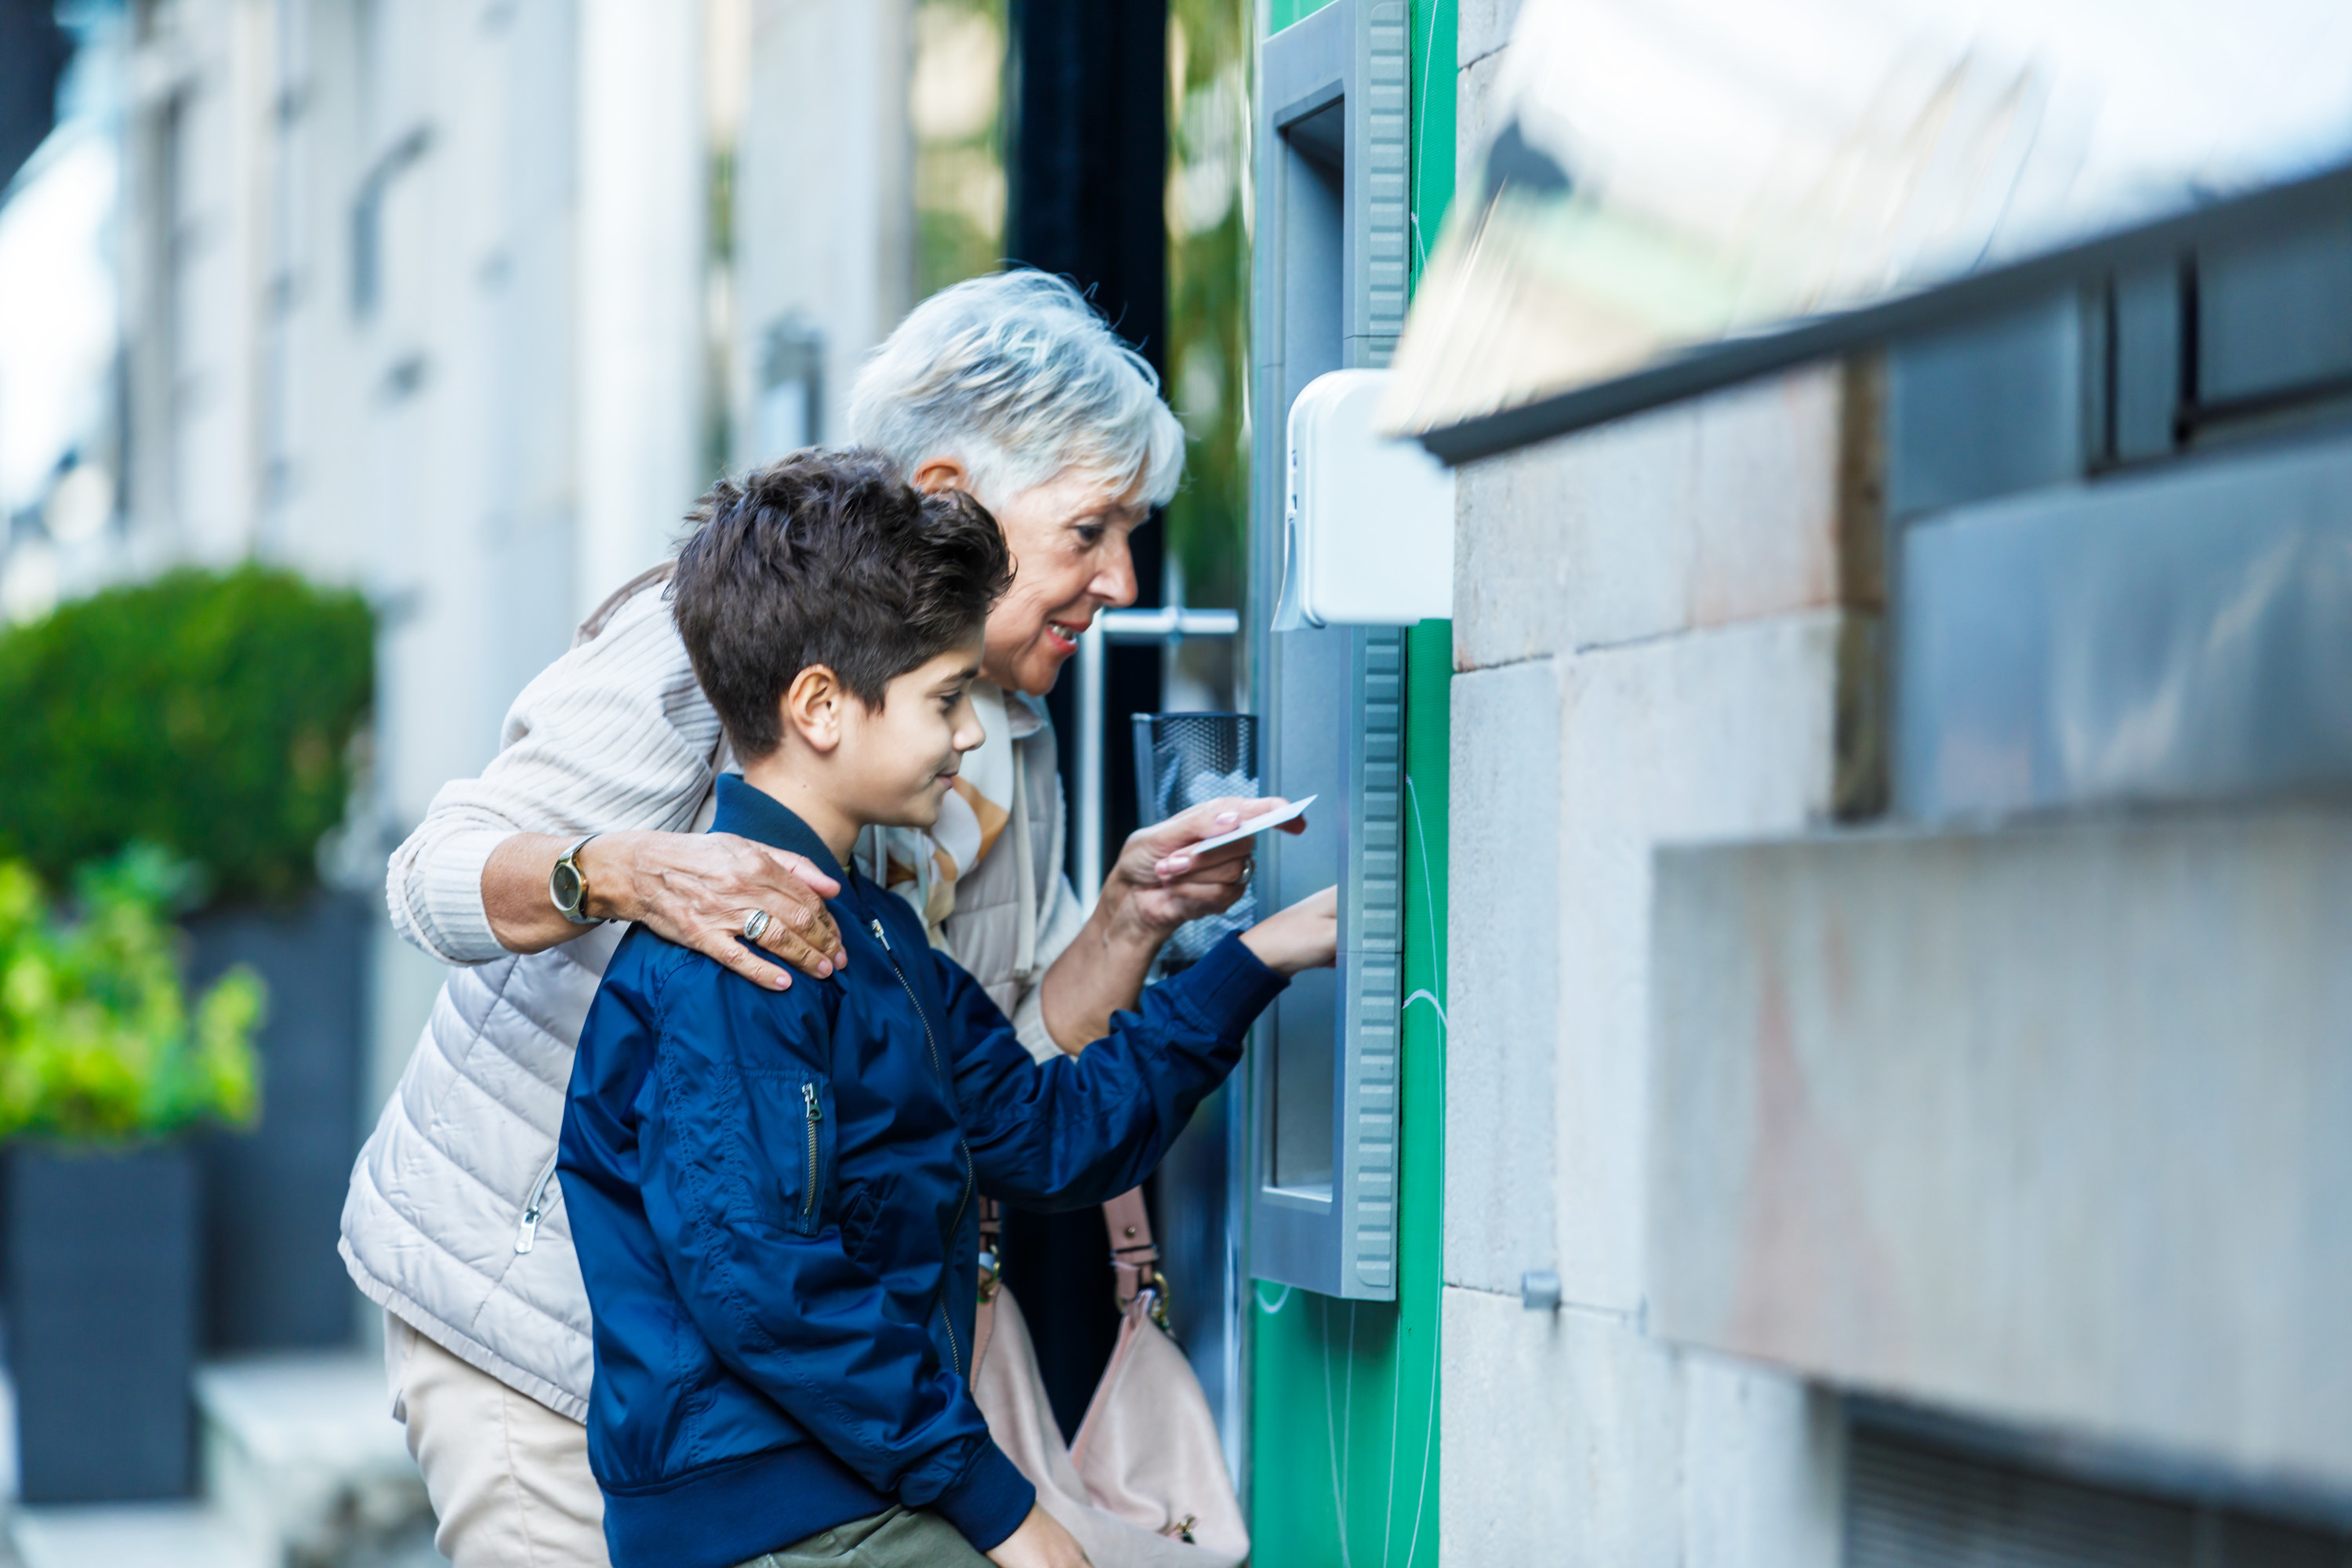 Little boy using an ATM with his grandmother